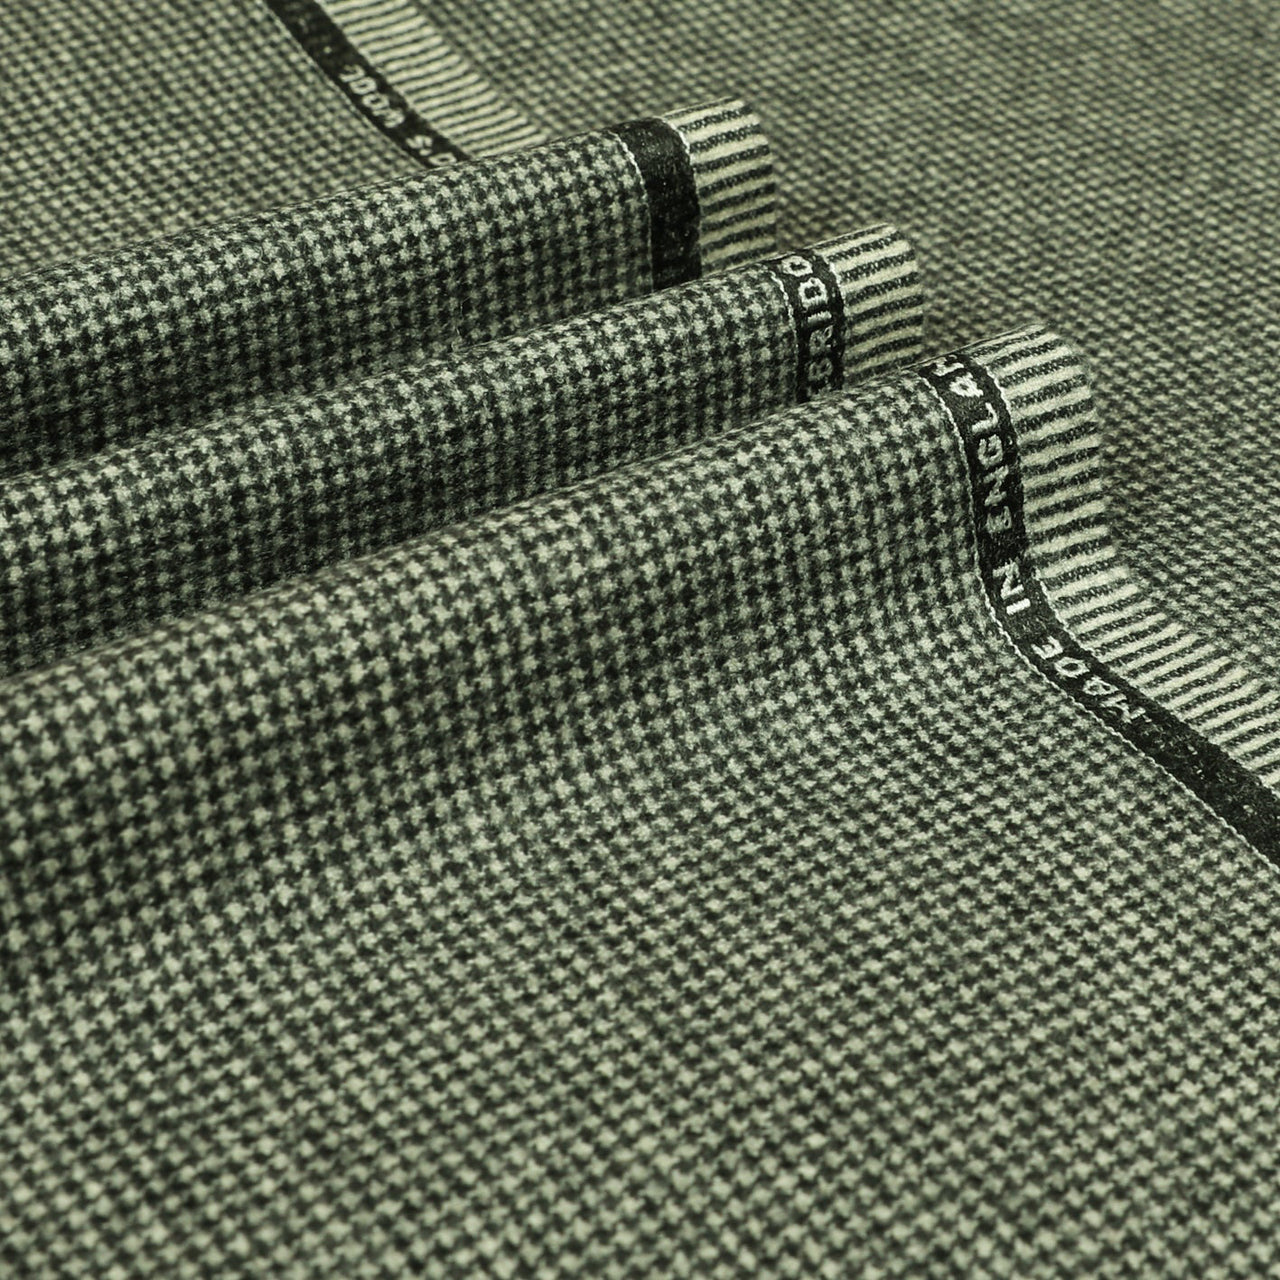 Dogtooth Check Super 120's Wool Flannel